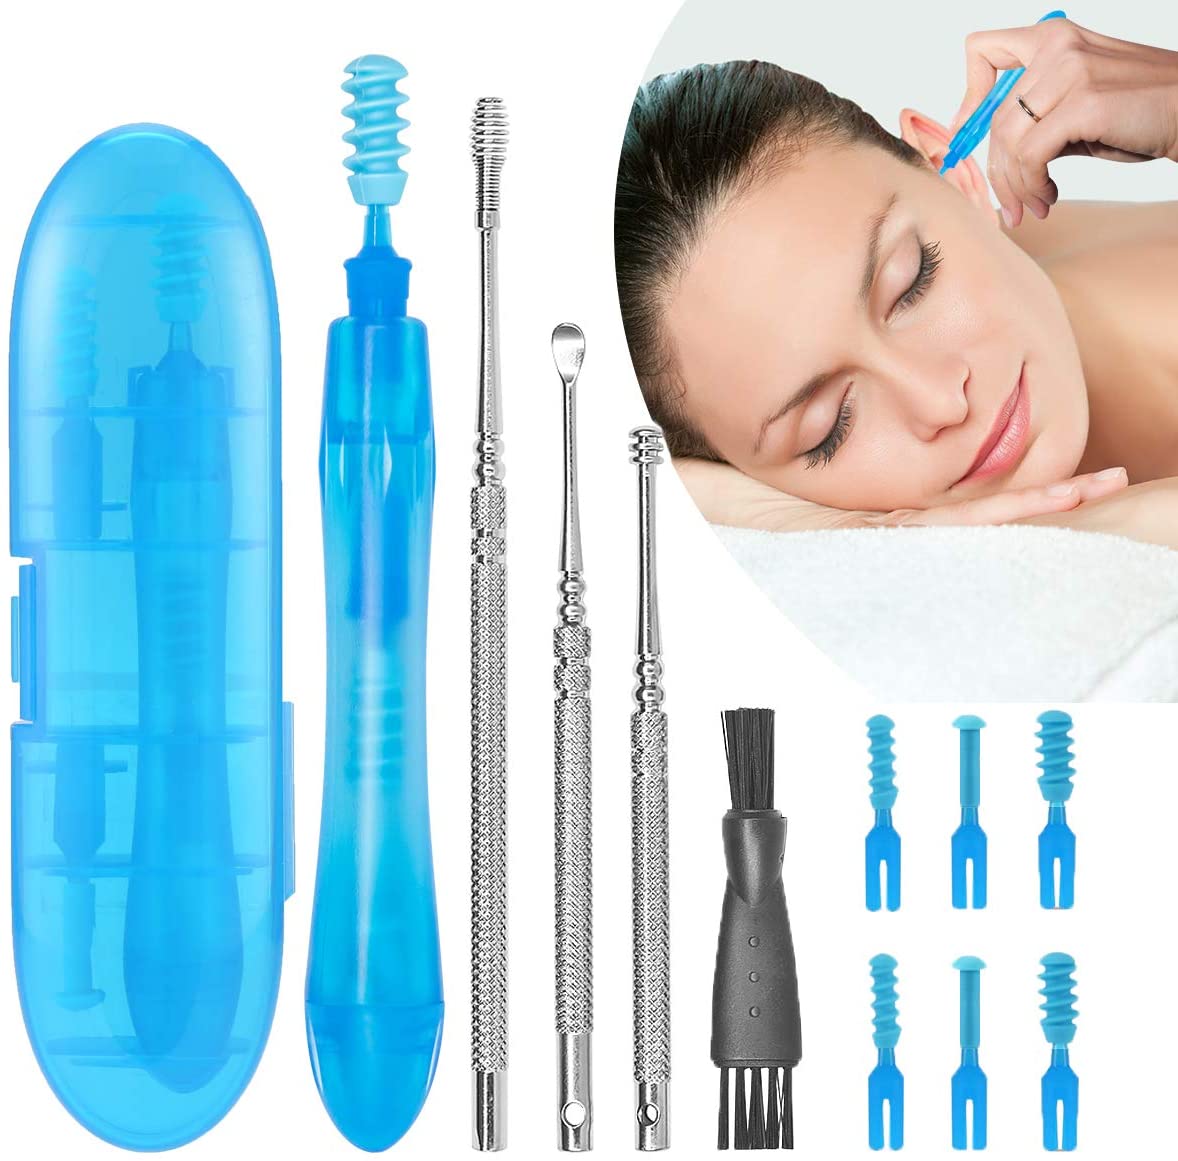 This Spiral Ear Wax Removal Tool Kit